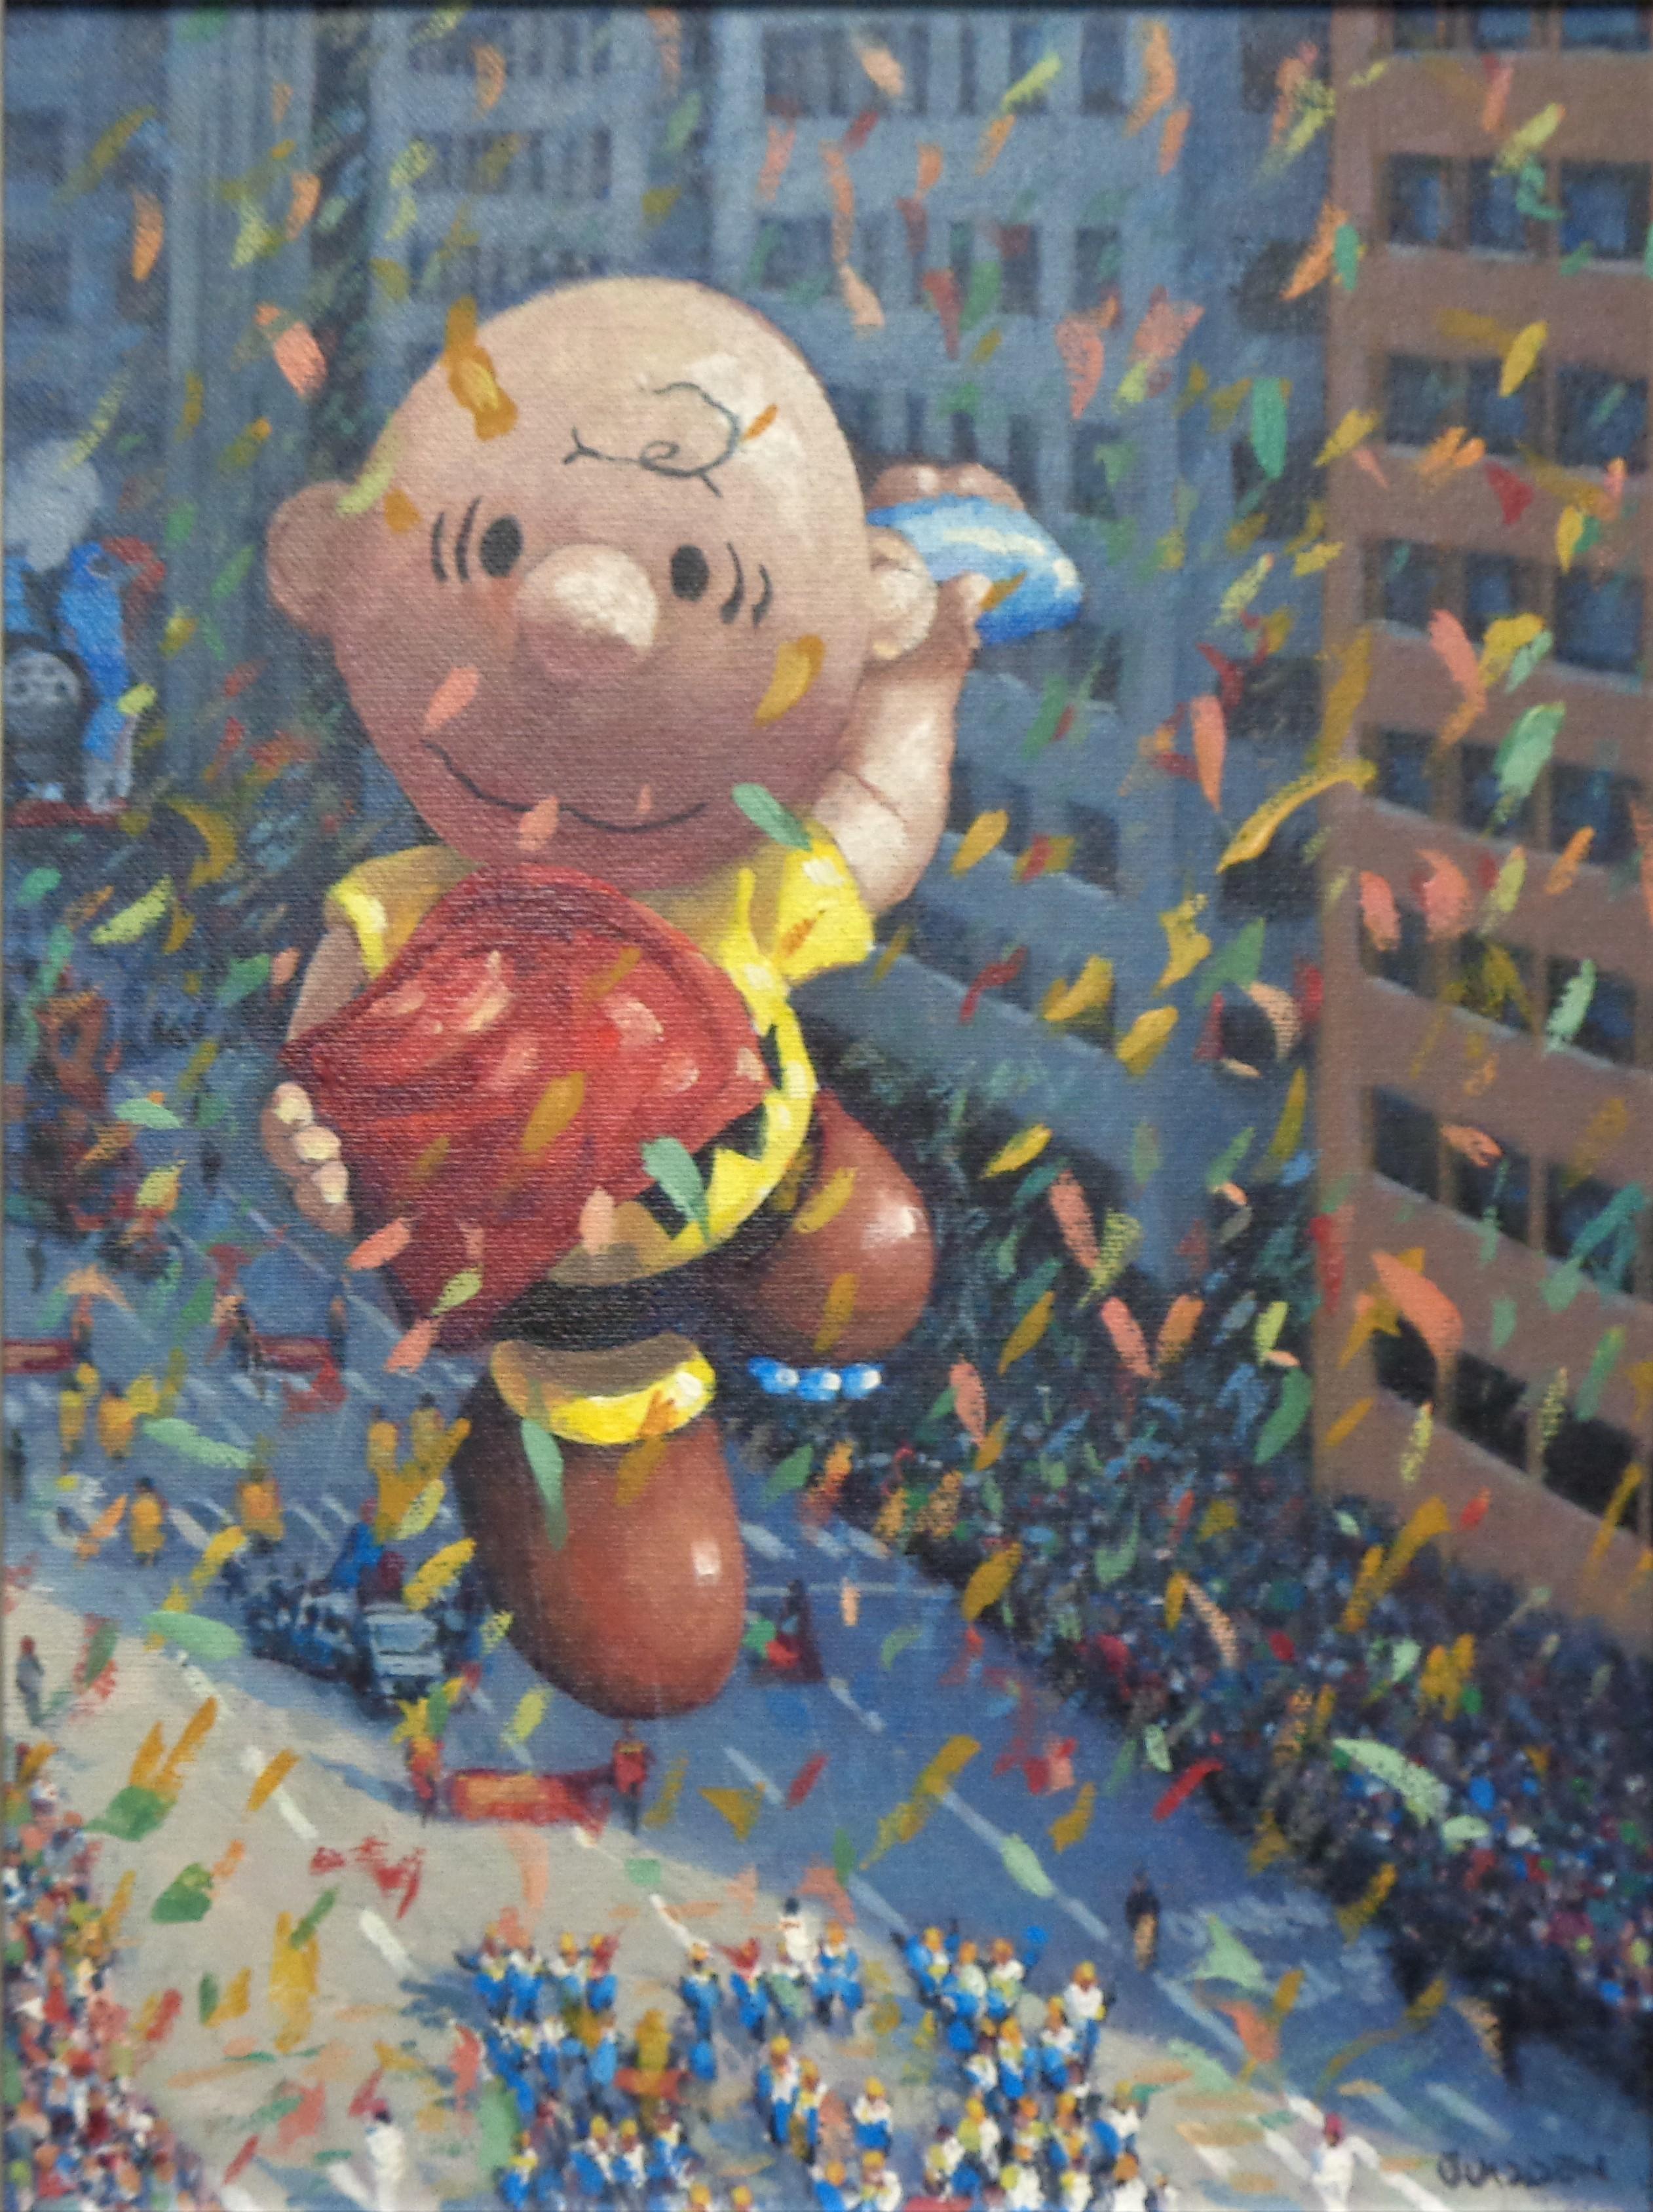   NYC Landscape Oil Painting Michael Budden Macy's Parade Series Charlie Brown For Sale 1